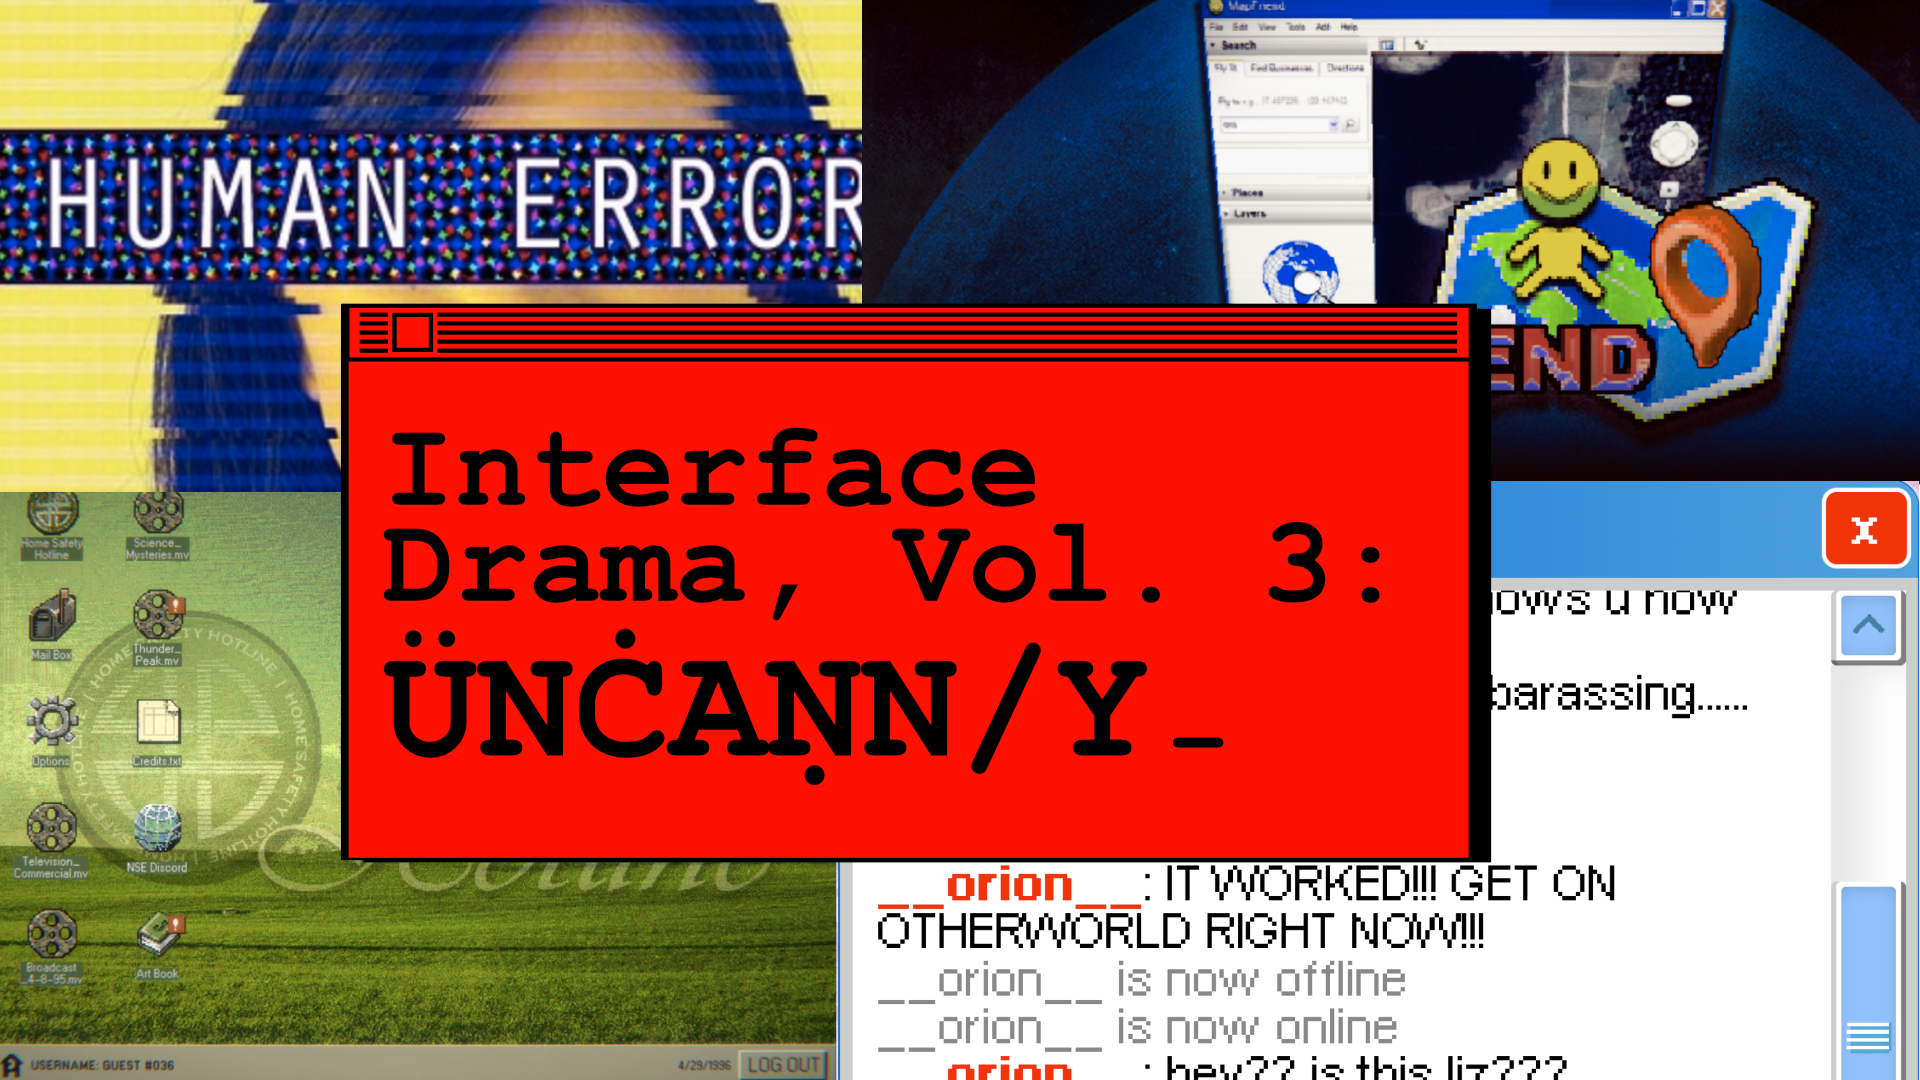 Interface Drama, Vol. 3: UNCANNY. Shows screenshots of different interfaces.